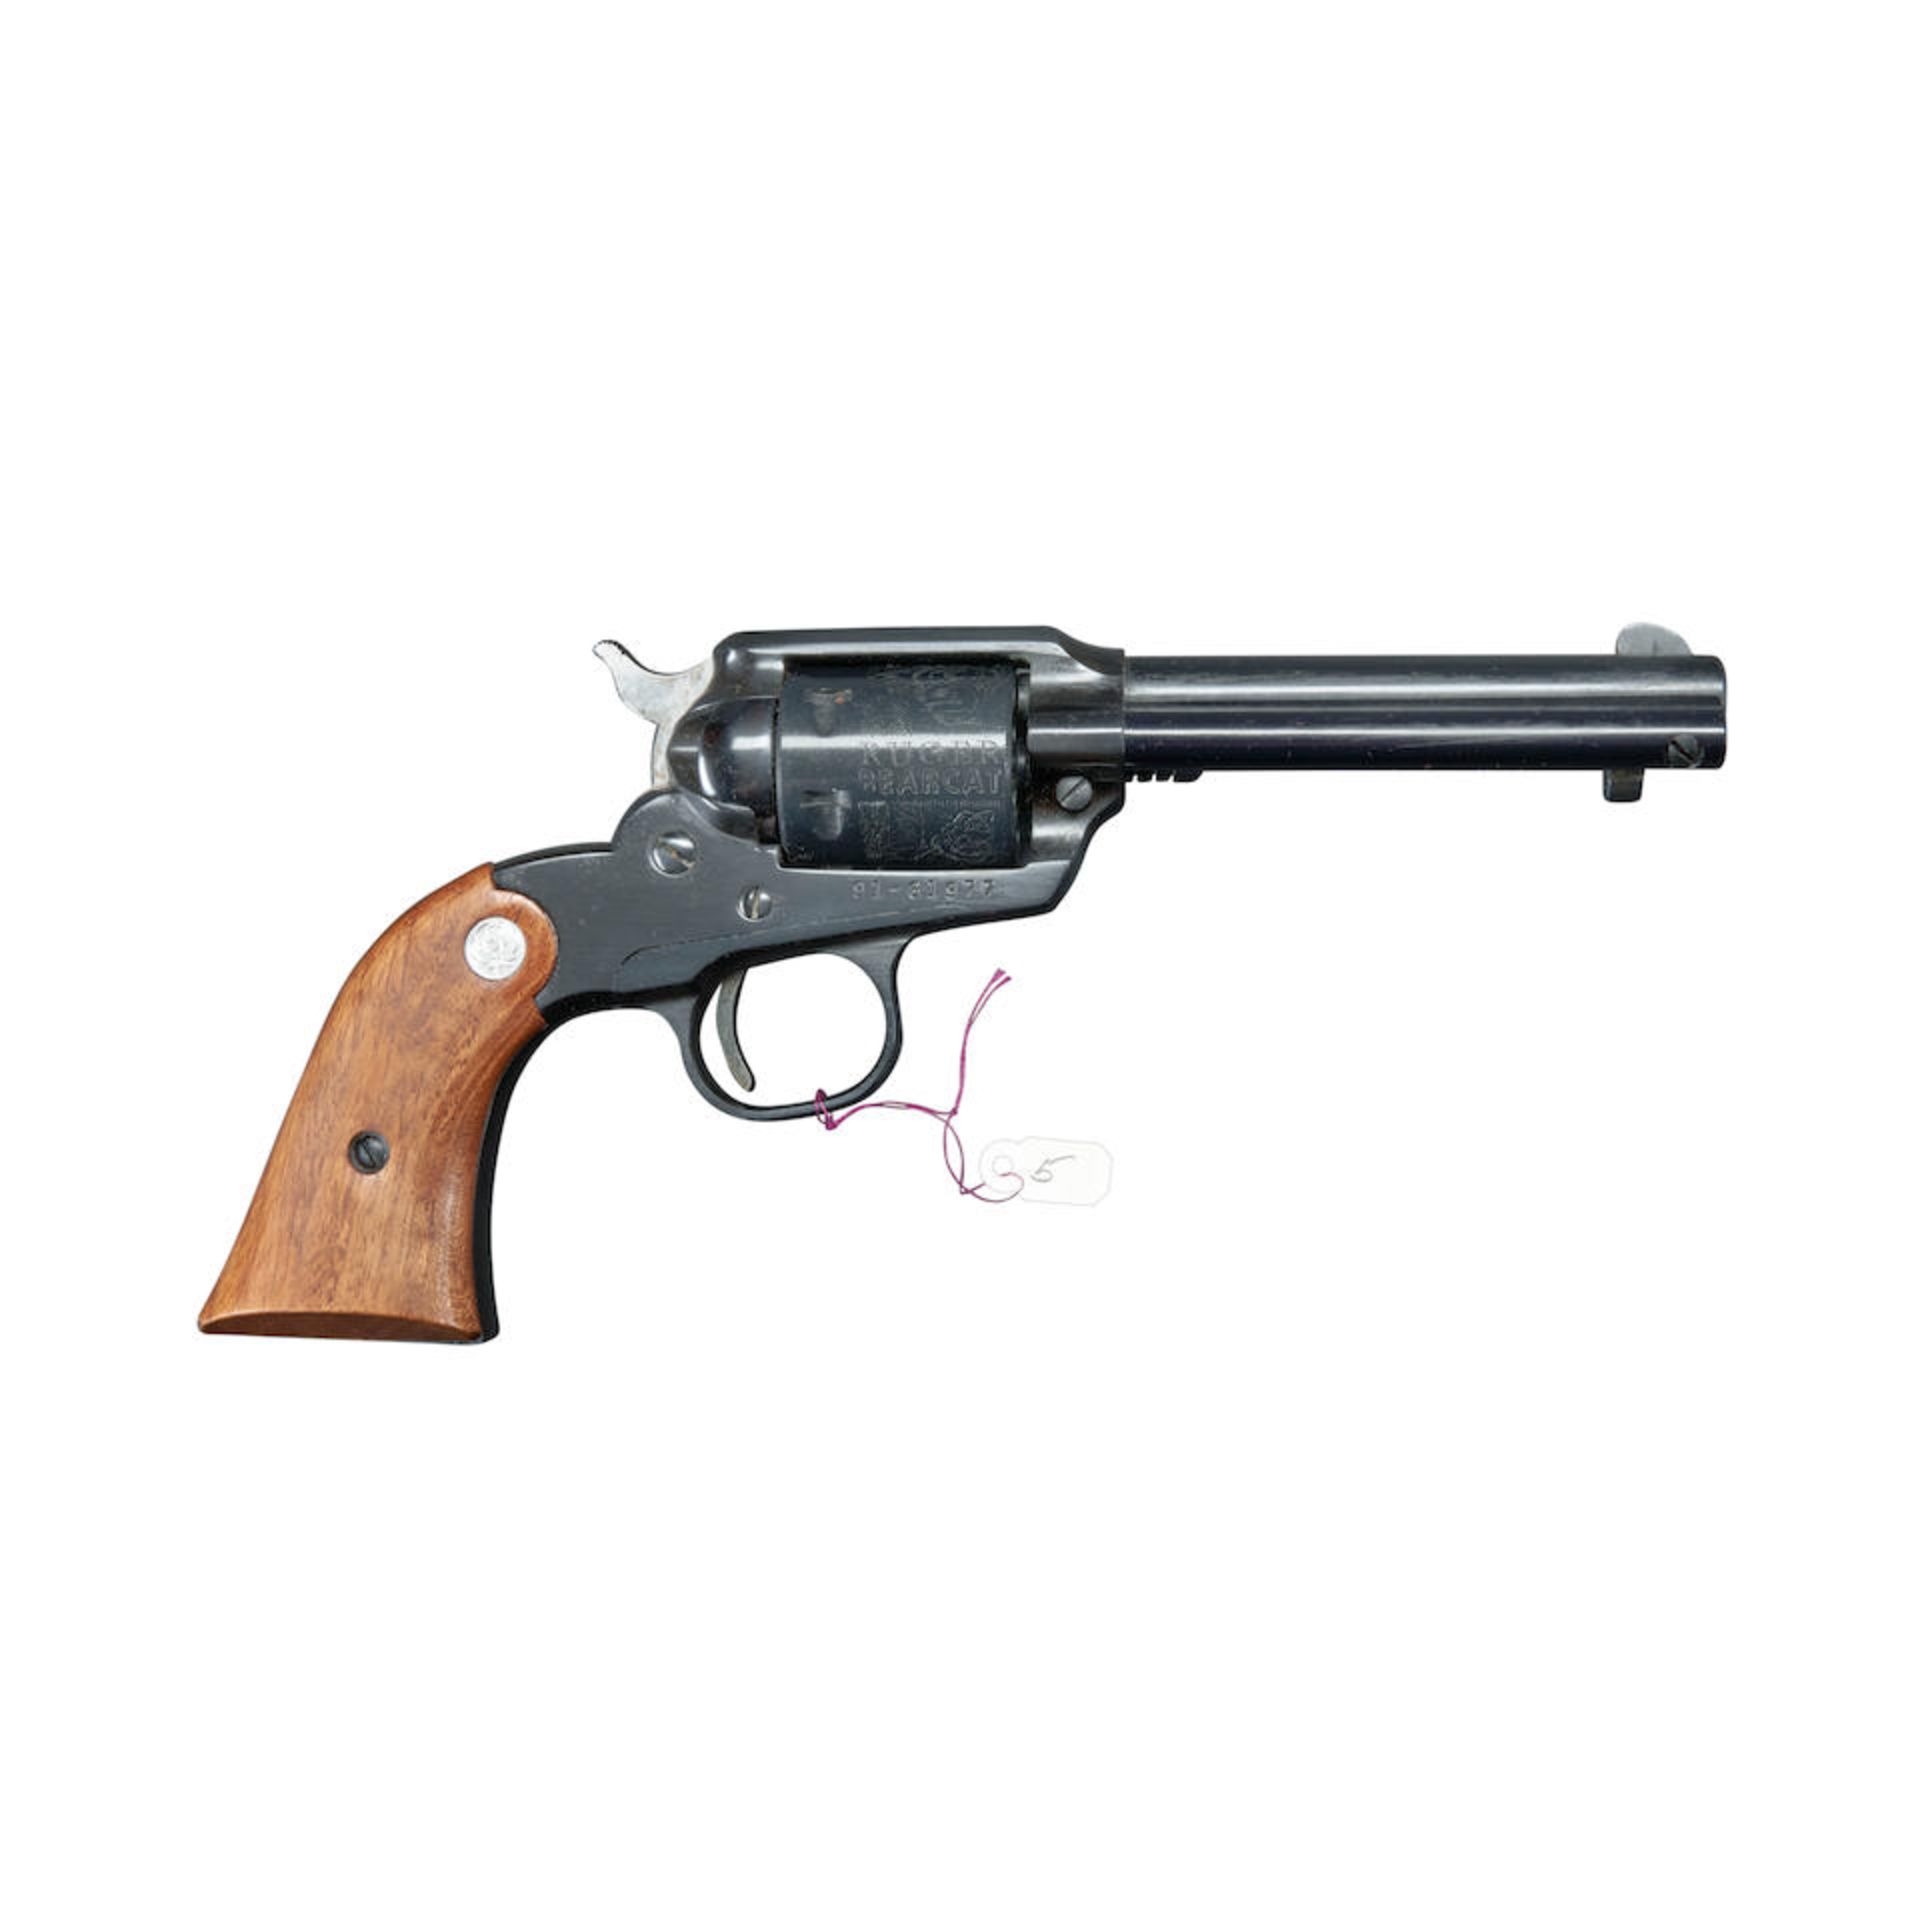 Ruger Super Bearcat with Steel Trigger Guard Single Action Revolver, Curio or Relic firearm - Bild 5 aus 5